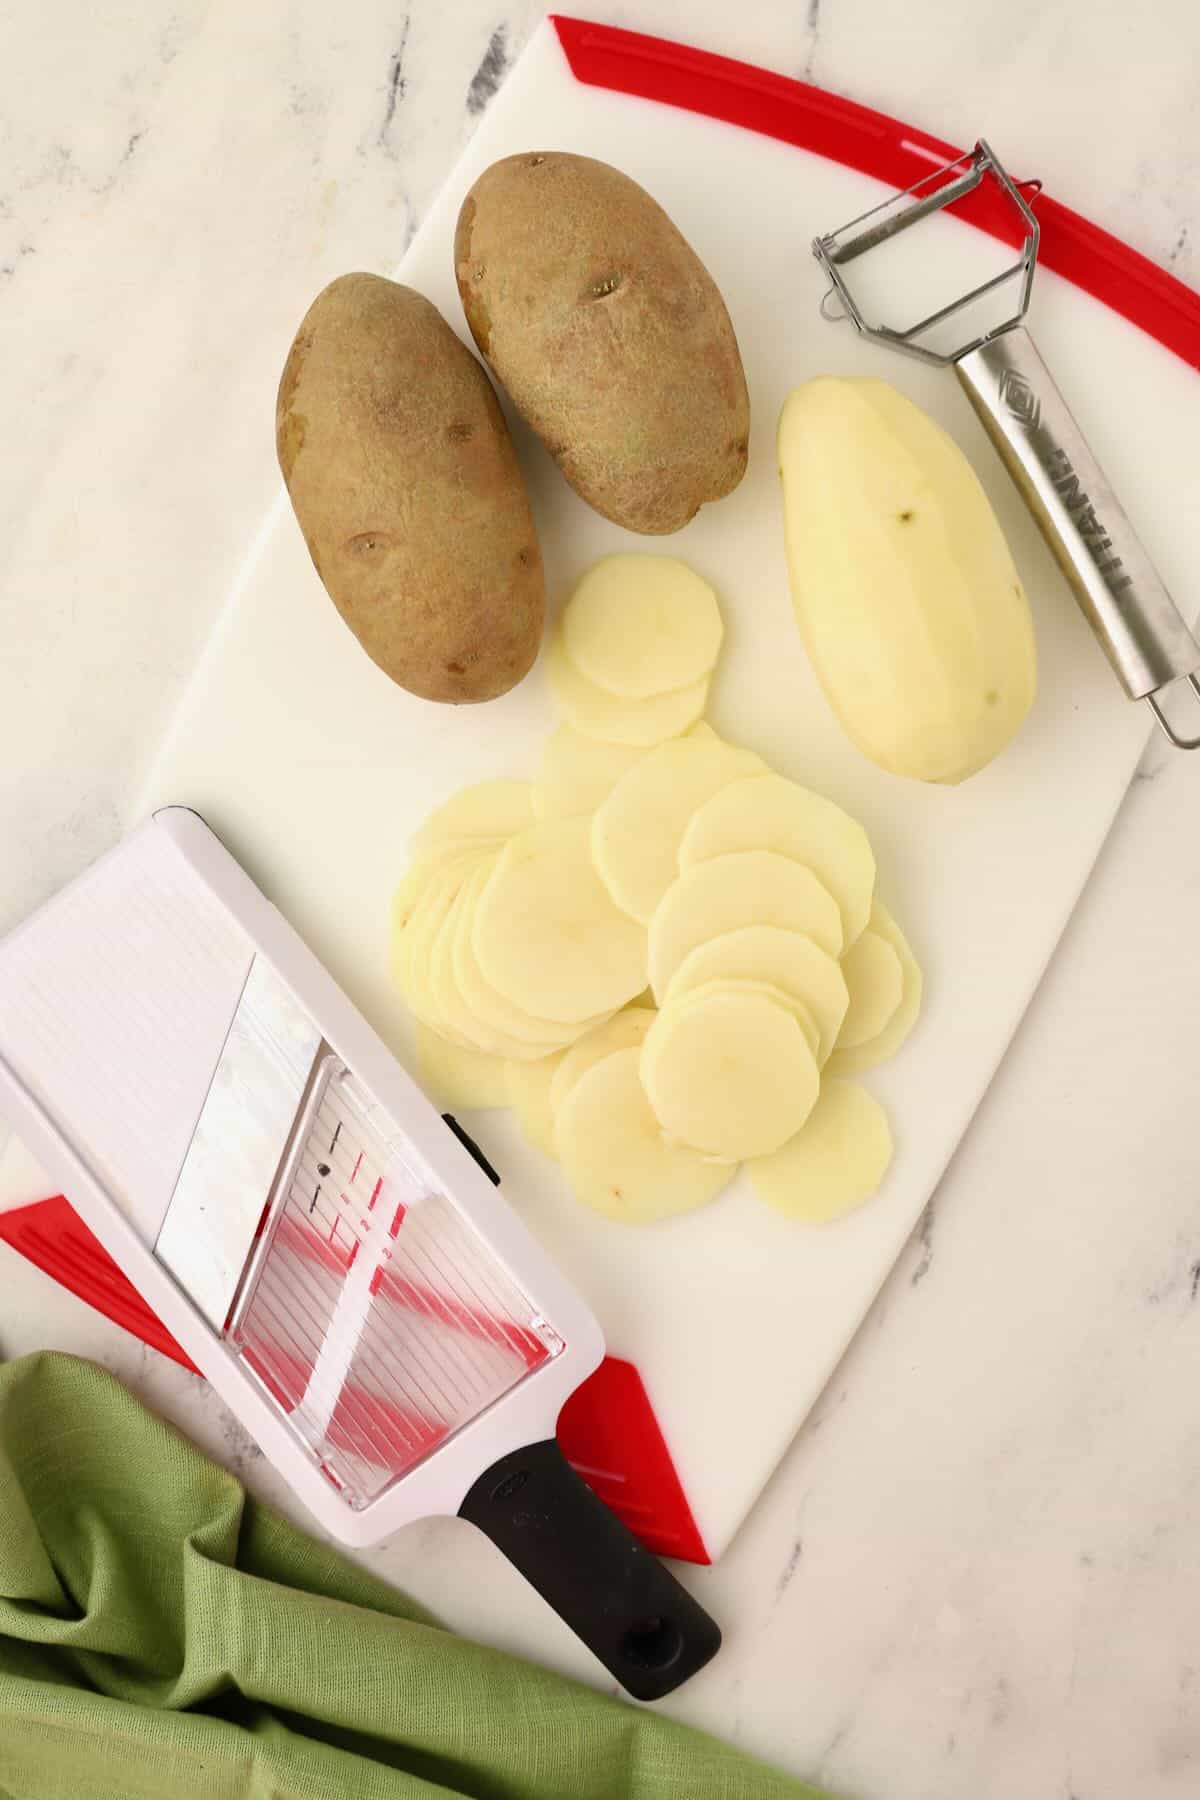 A cutting board with sliced potatoes and a mandolin.